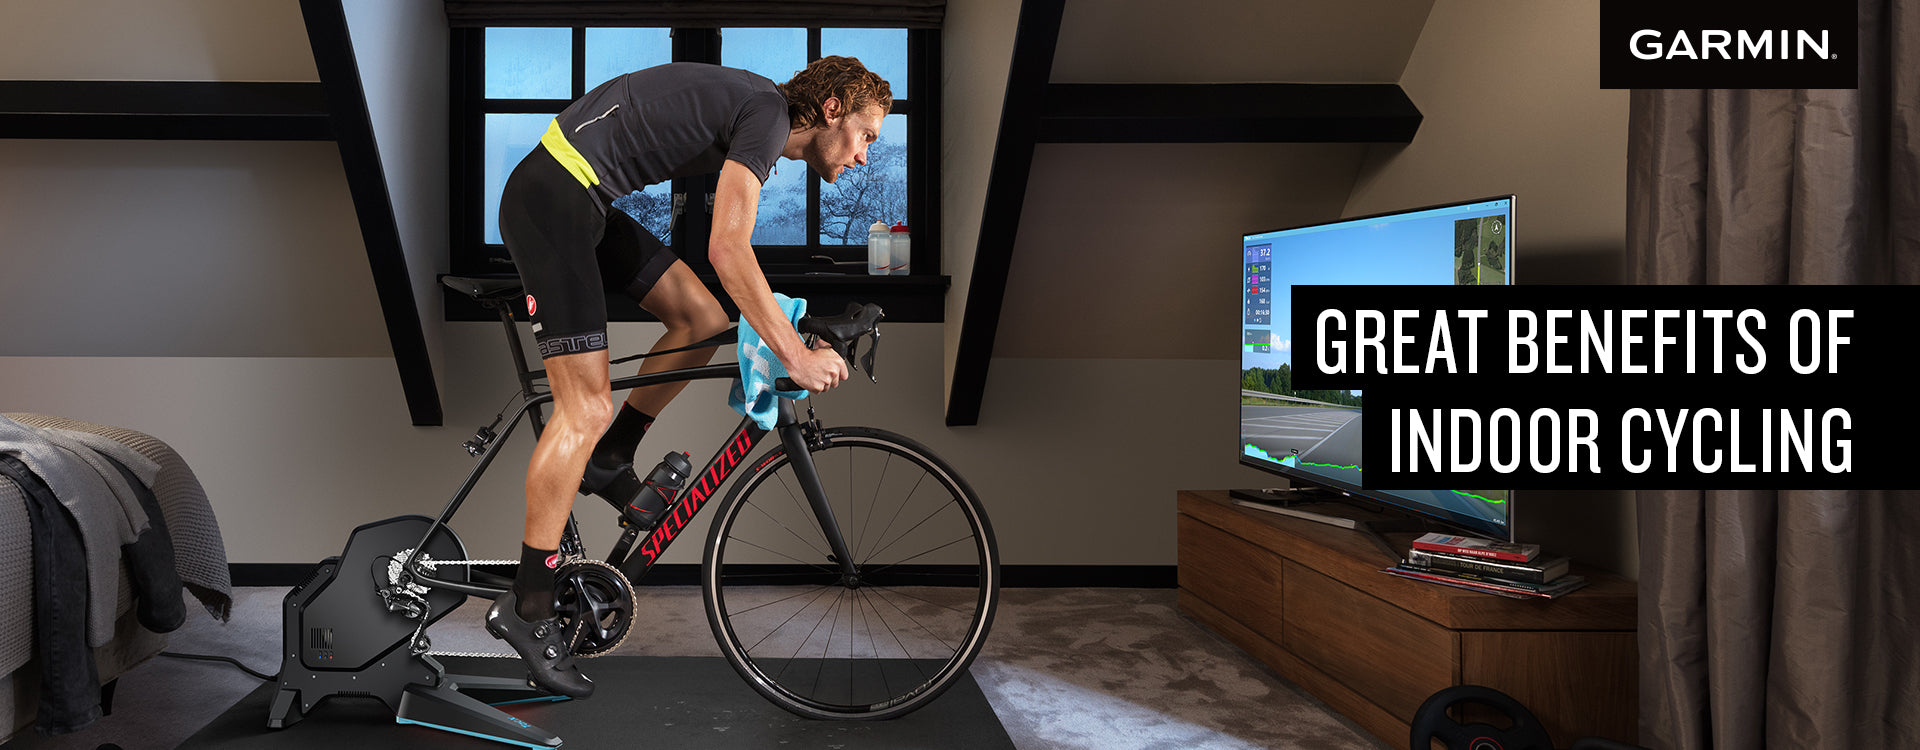 Great Benefits of Indoor Cycling